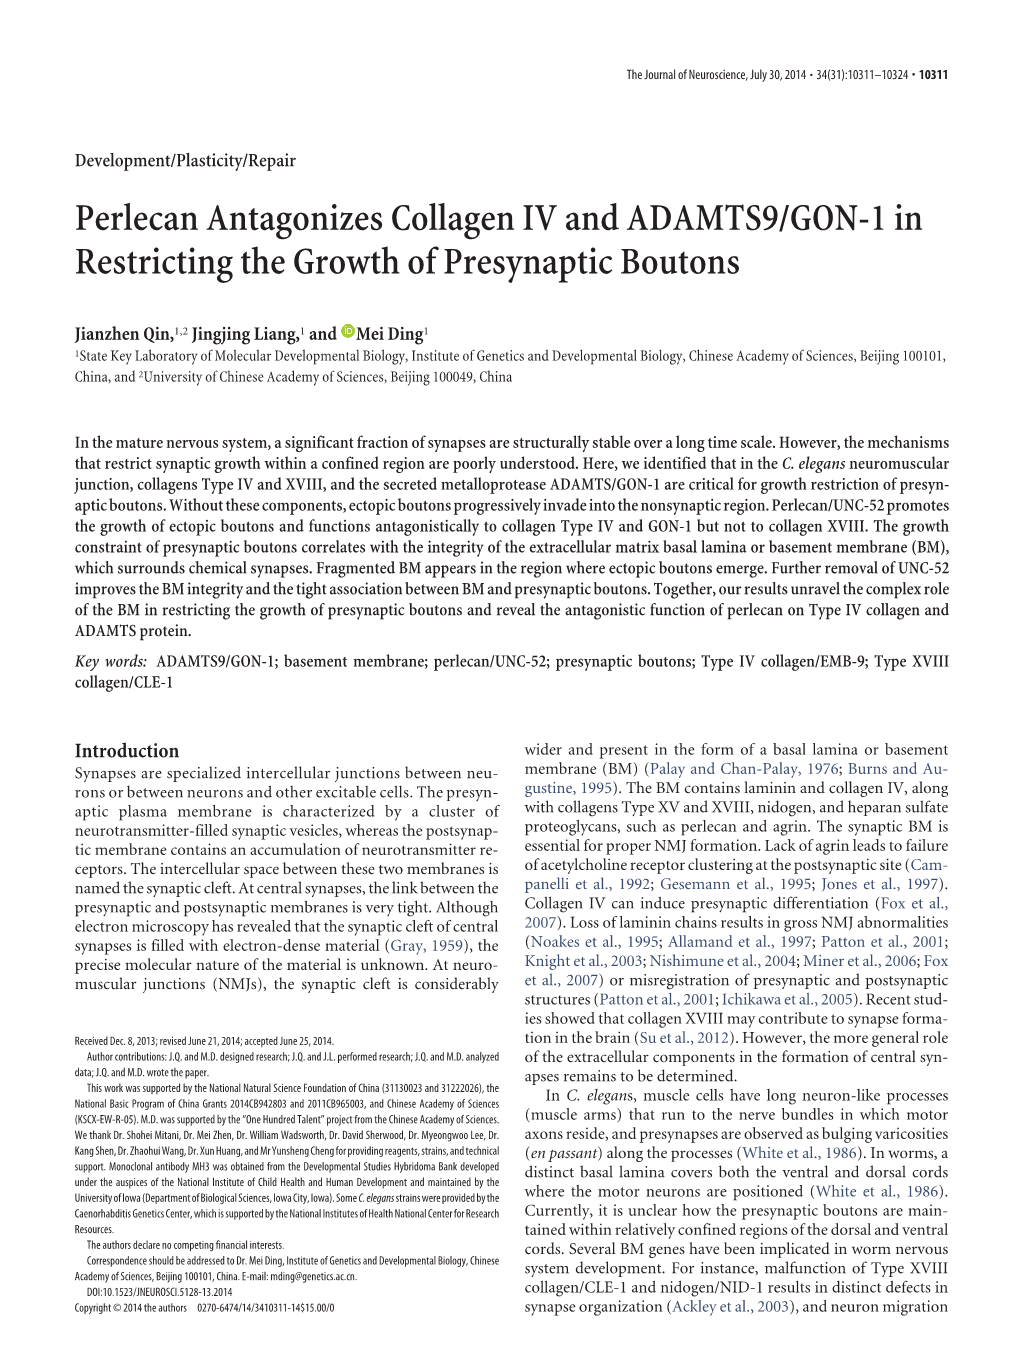 Perlecan Antagonizes Collagen IV and ADAMTS9/GON-1 in Restricting the Growth of Presynaptic Boutons